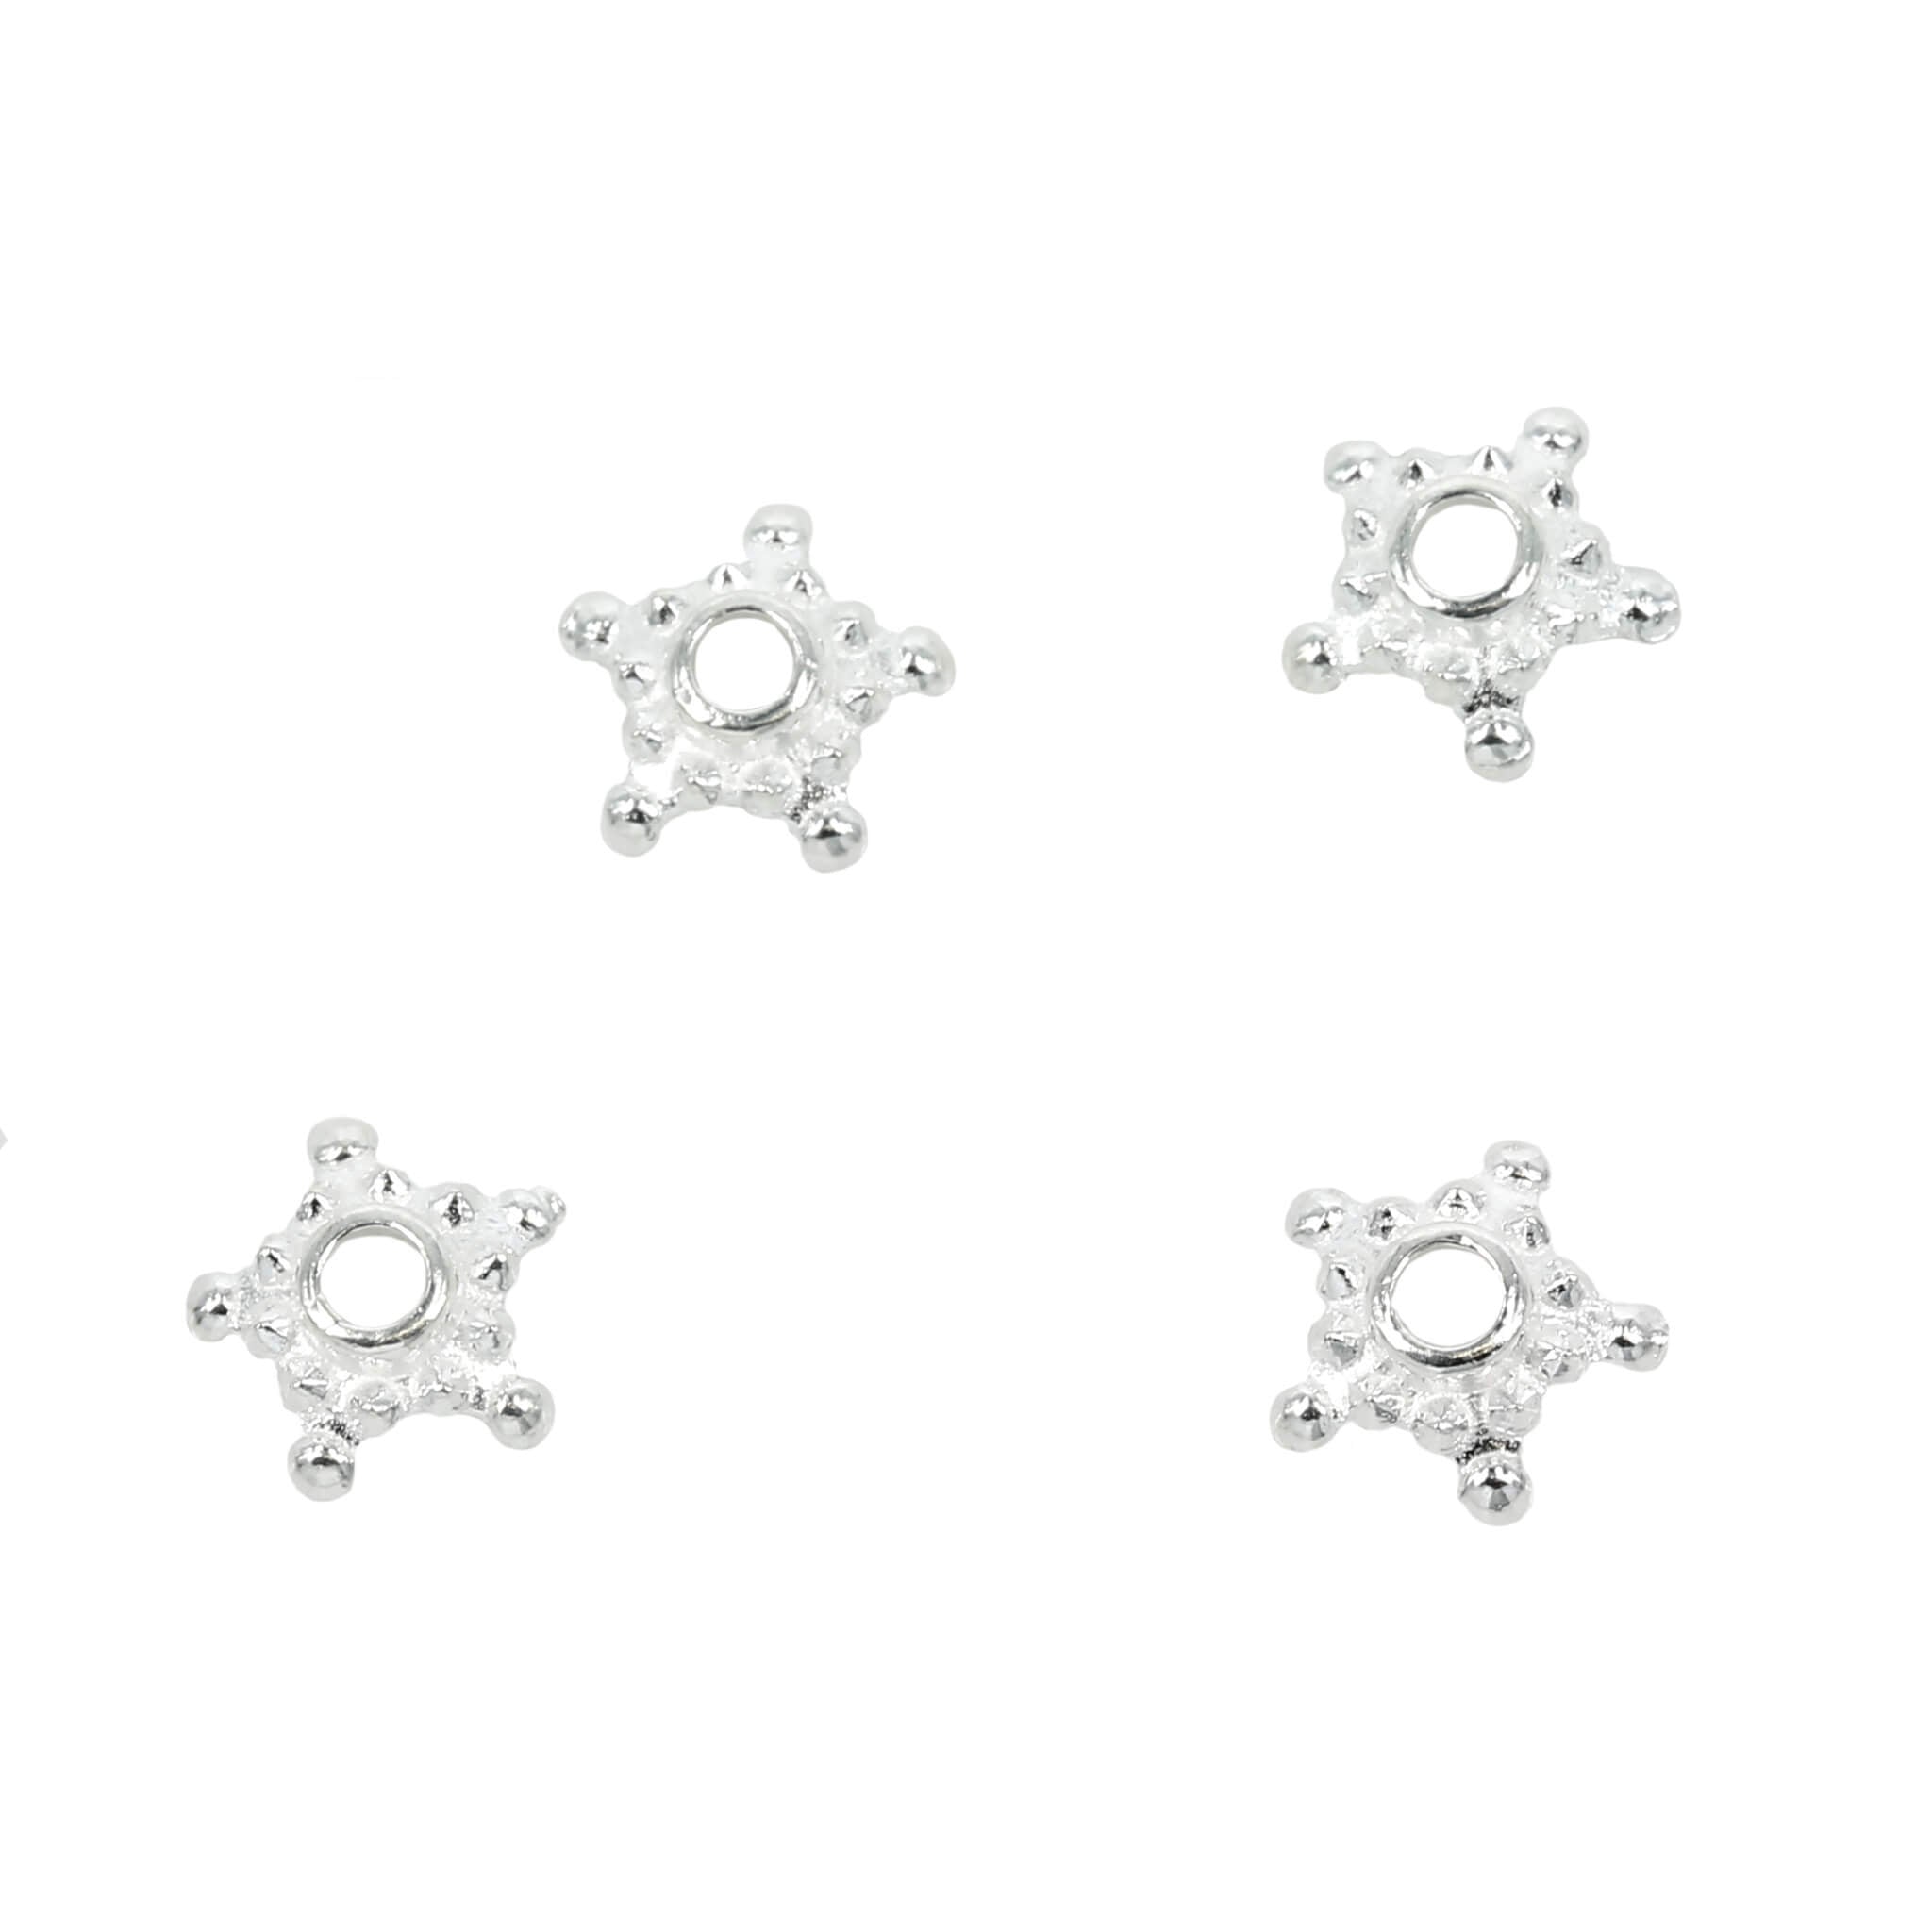 Bali-Style Star Granulation Bead Cap in Sterling Silver 8mm